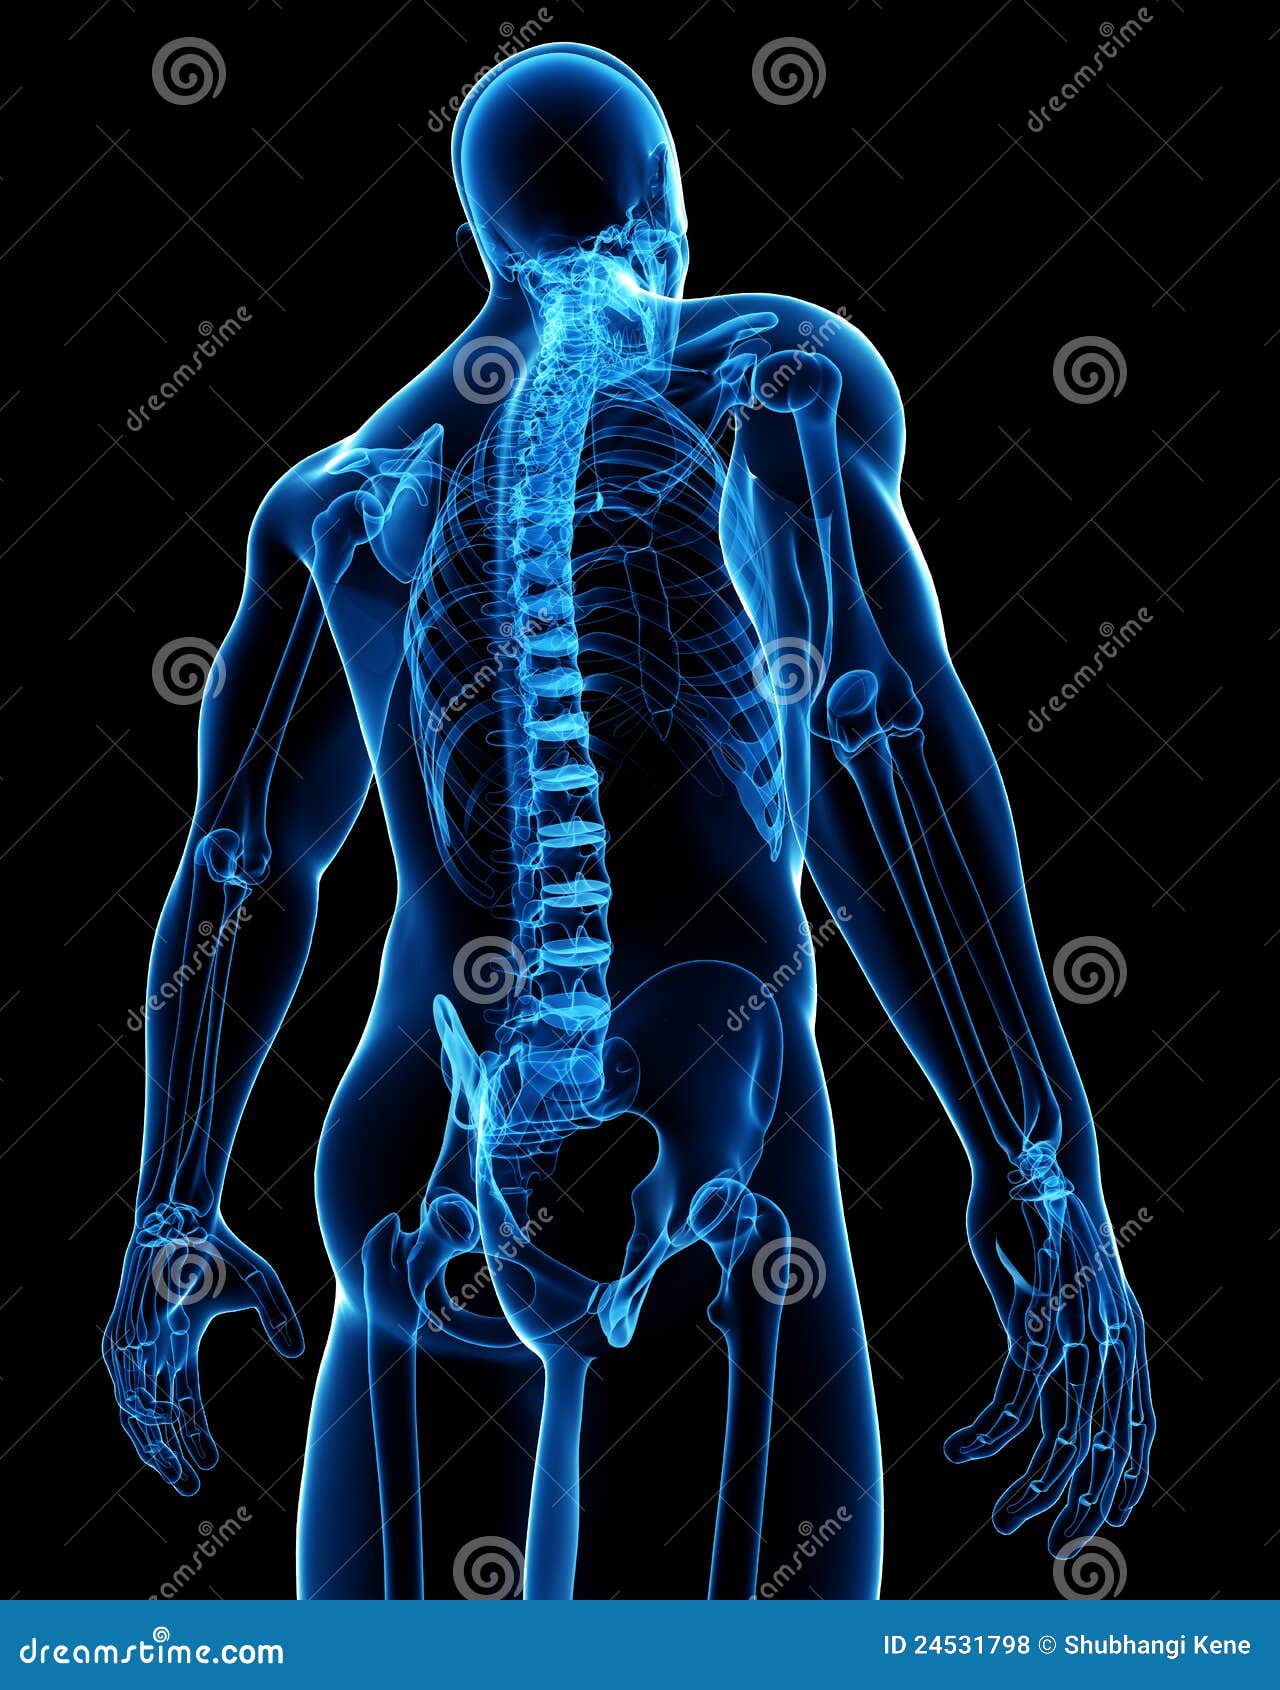 Male Spinal Cord X-ray Anatomy Royalty Free Stock Photos - Image: 24531798